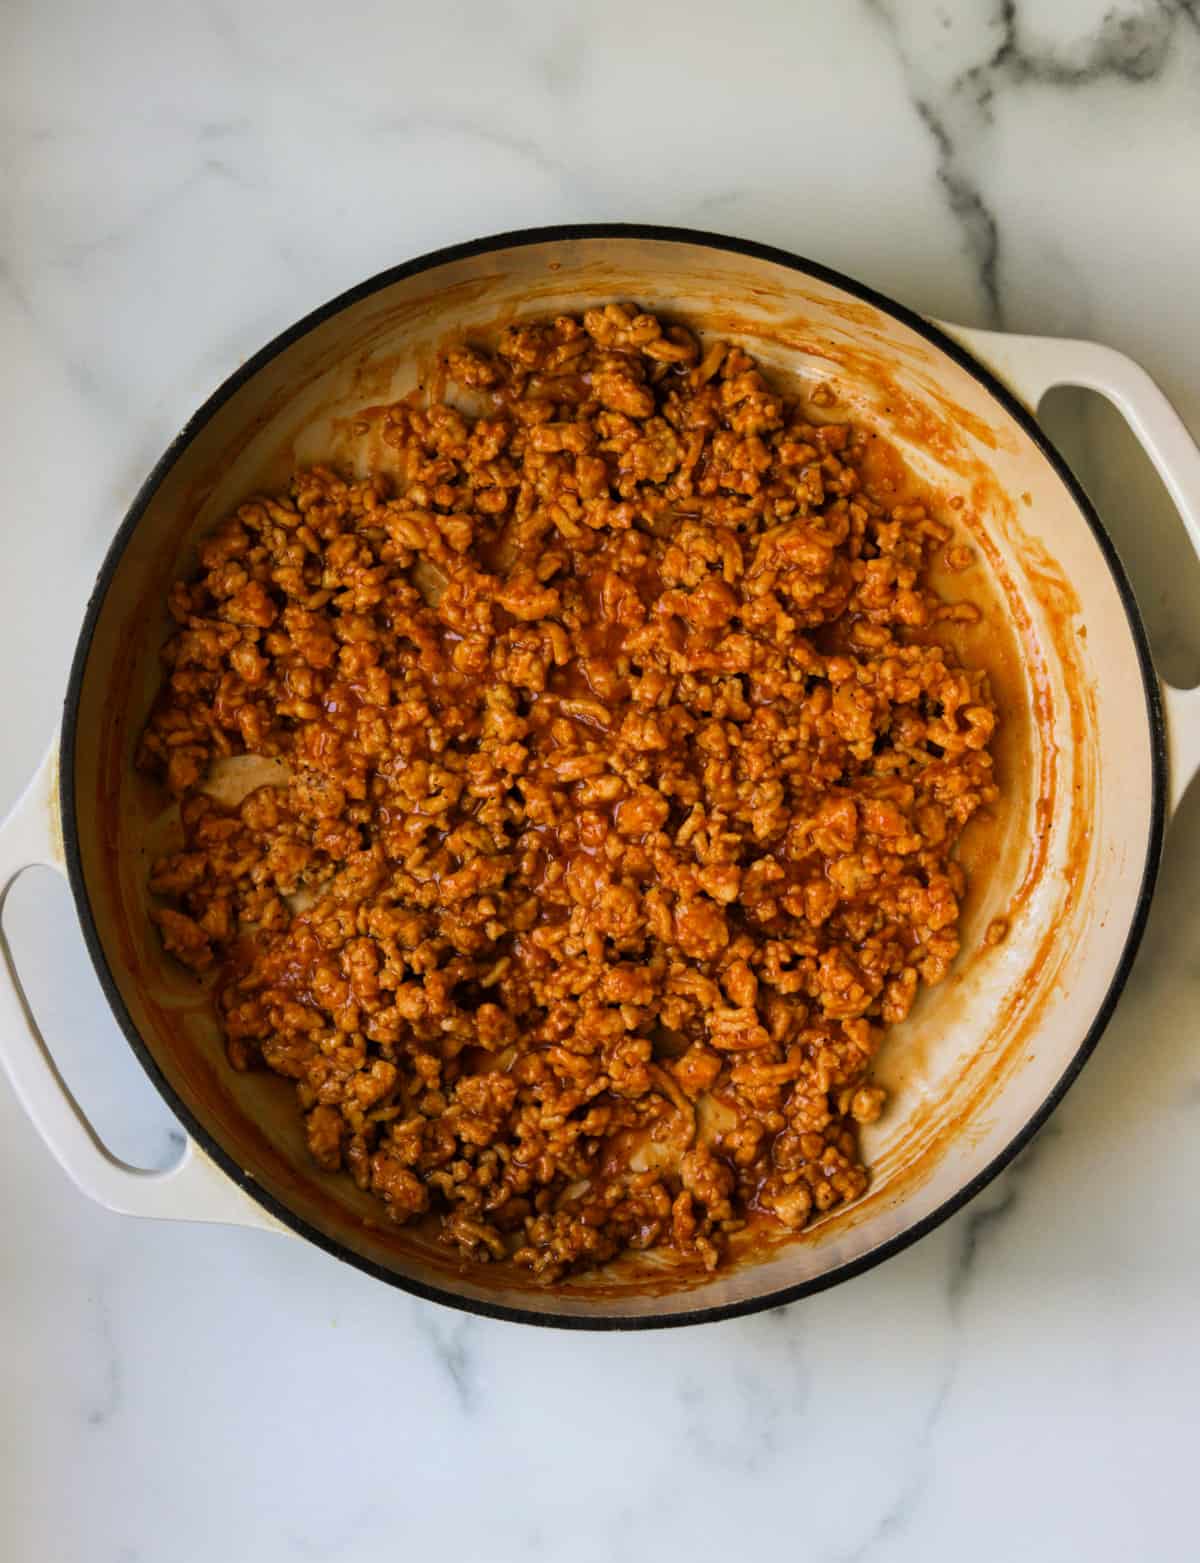 A skillet filled with ground chicken sloppy joe meat.